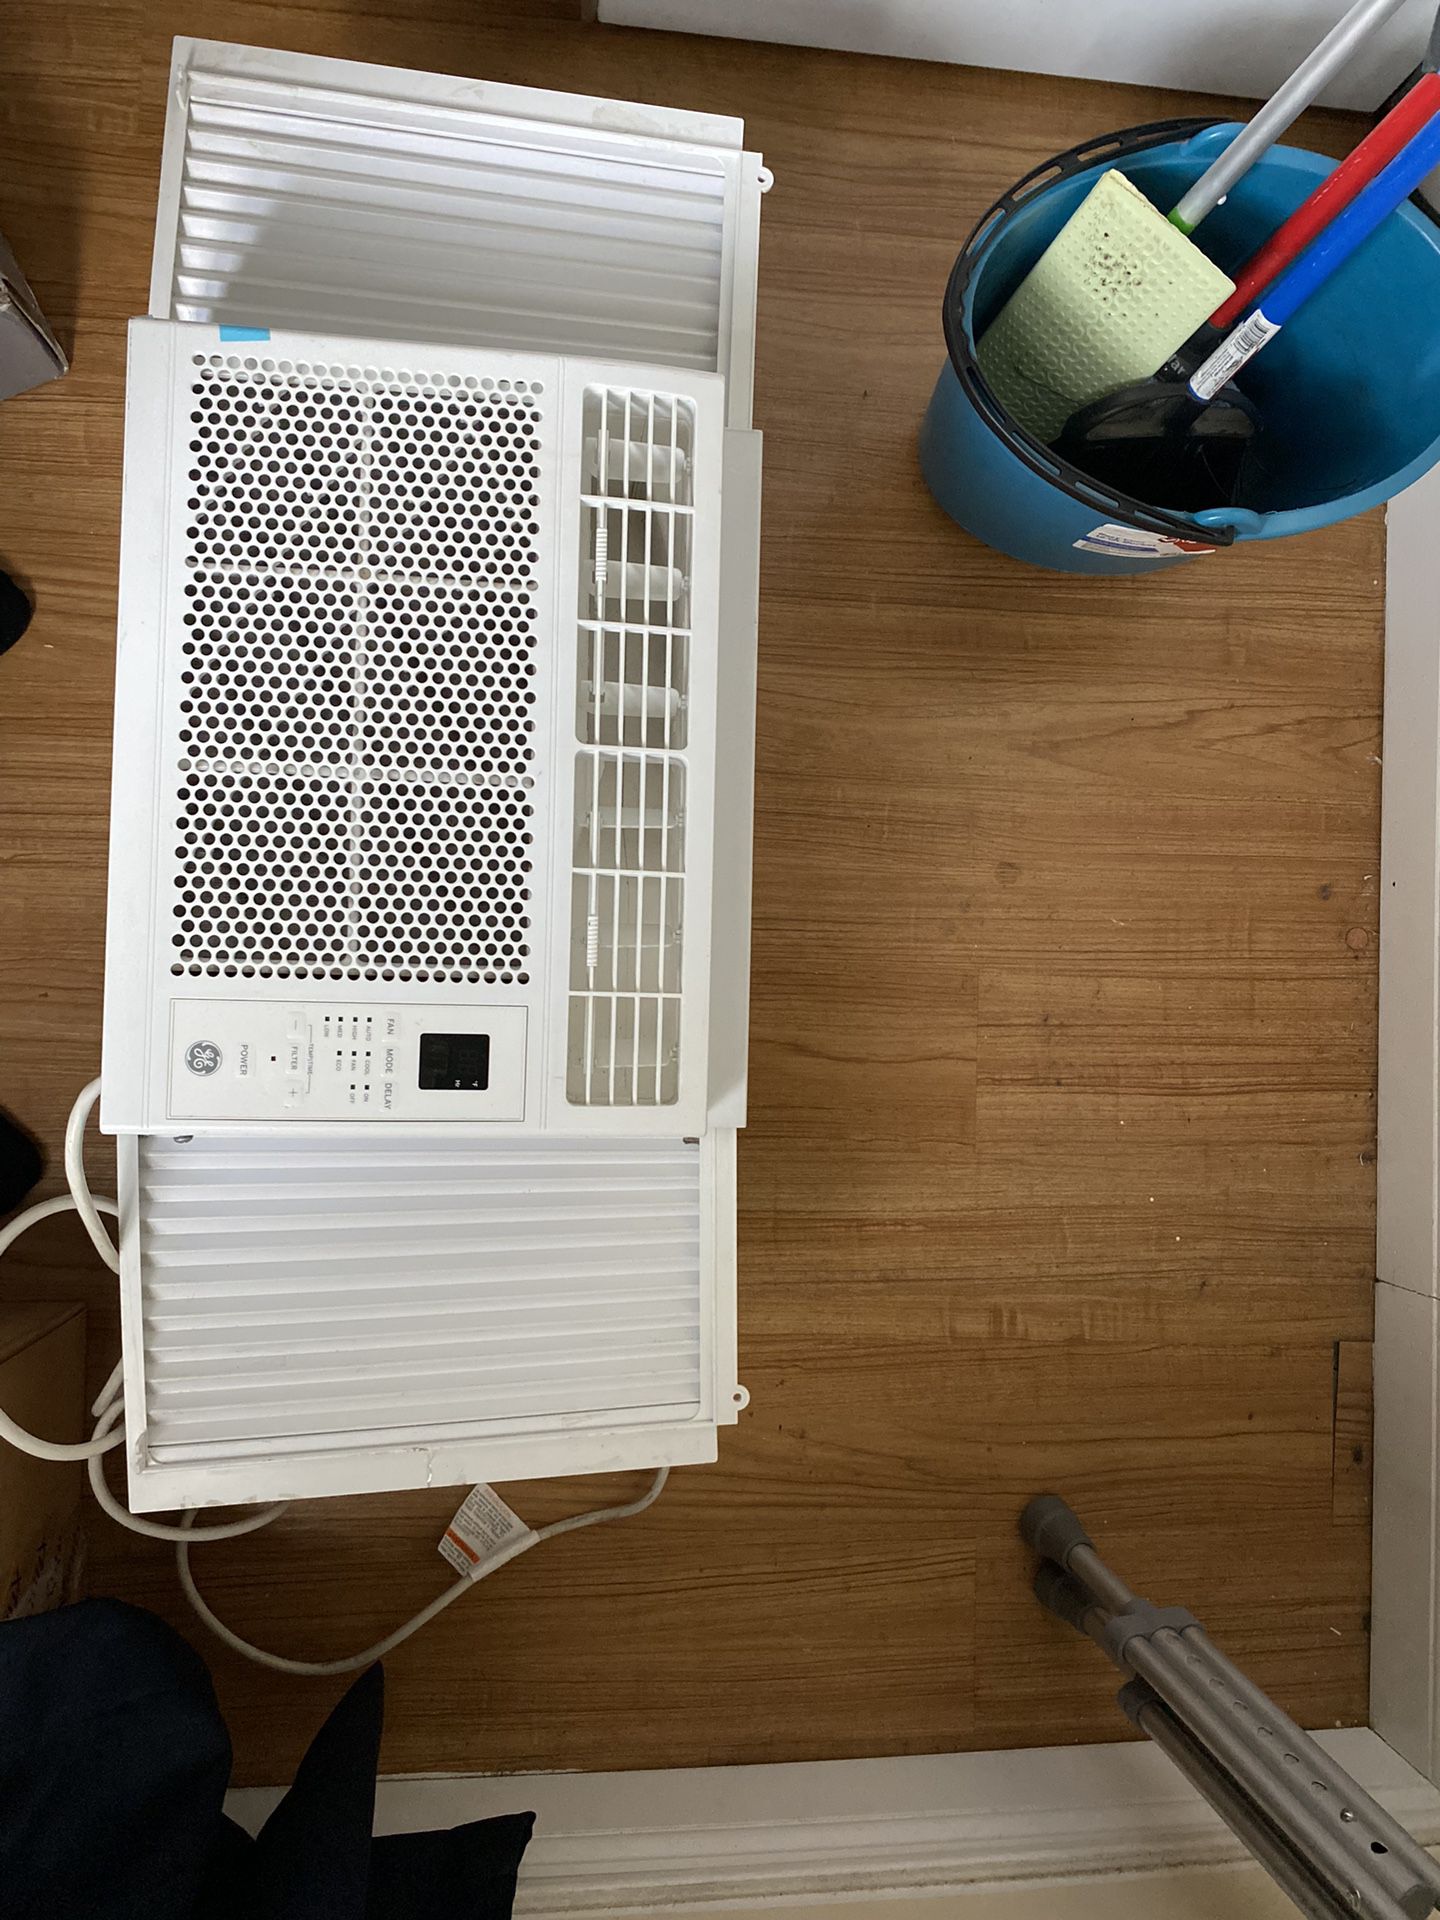 Brand New General Electric Air Conditioner 